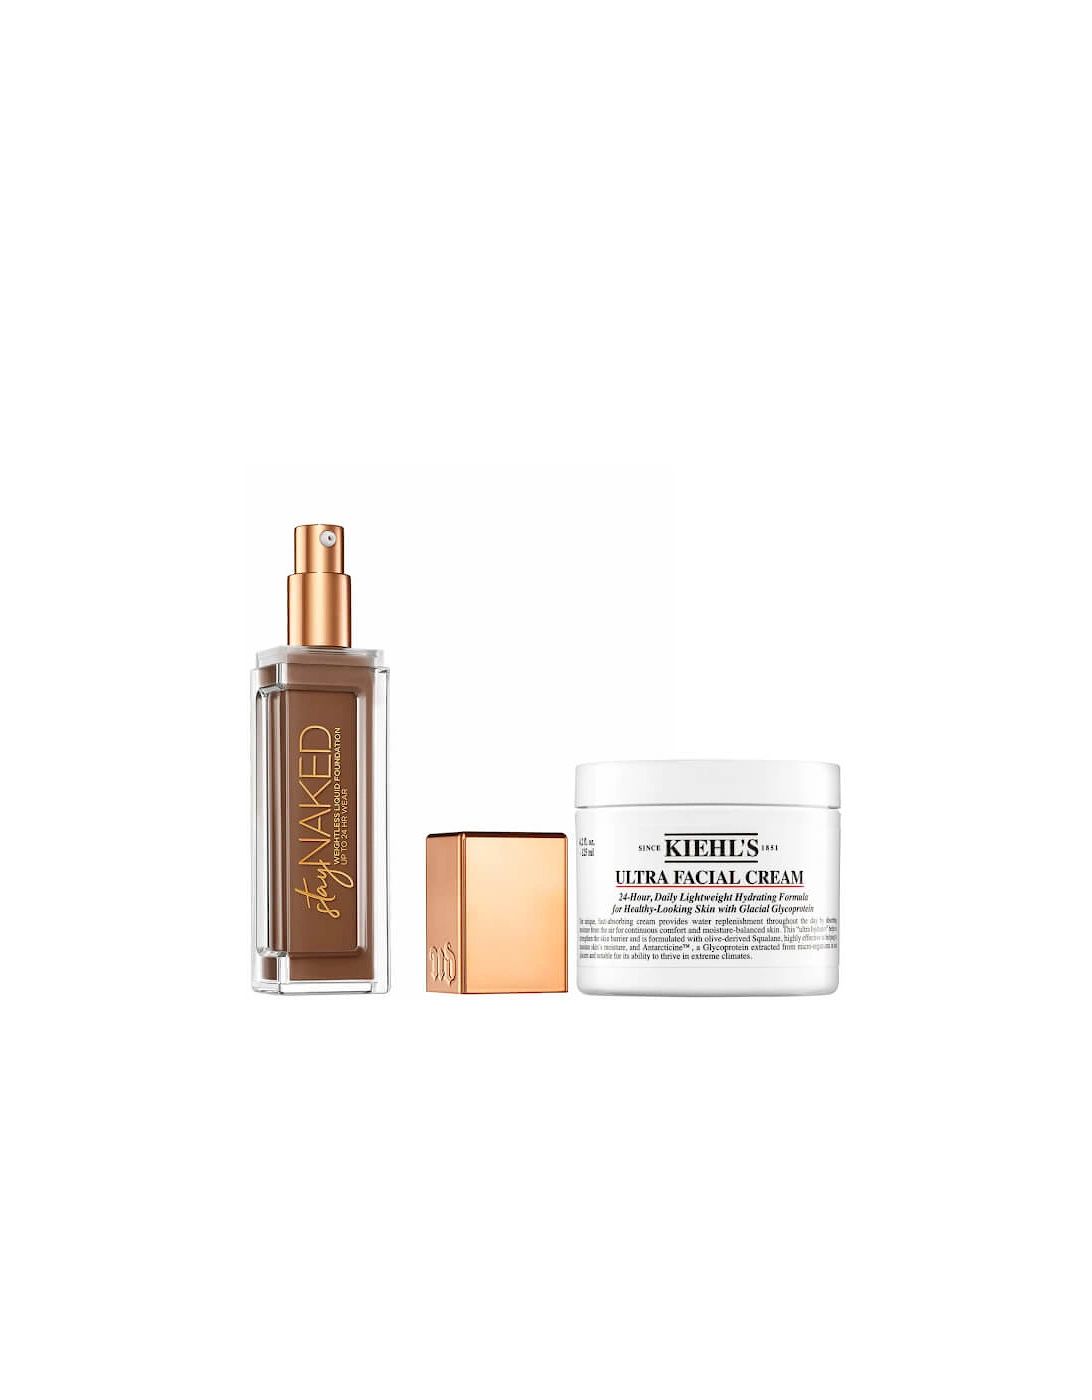 Stay Naked Foundation x Kiehl's Ultra Facial Cream 125ml Bundle - 80WY, 2 of 1